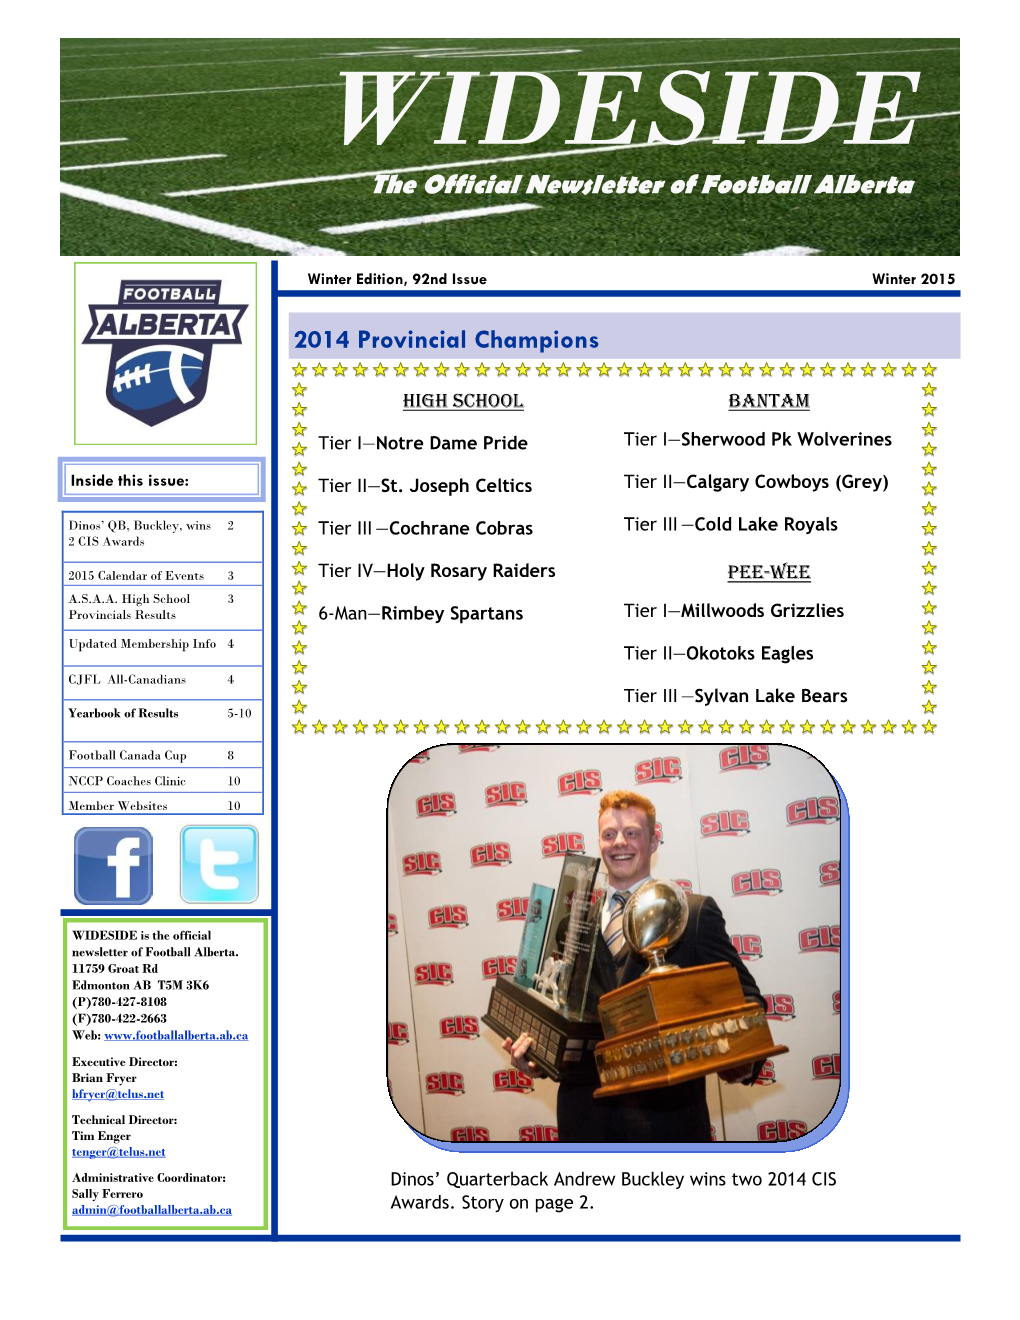 WIDESIDE the Official Newsletter of Football Alberta